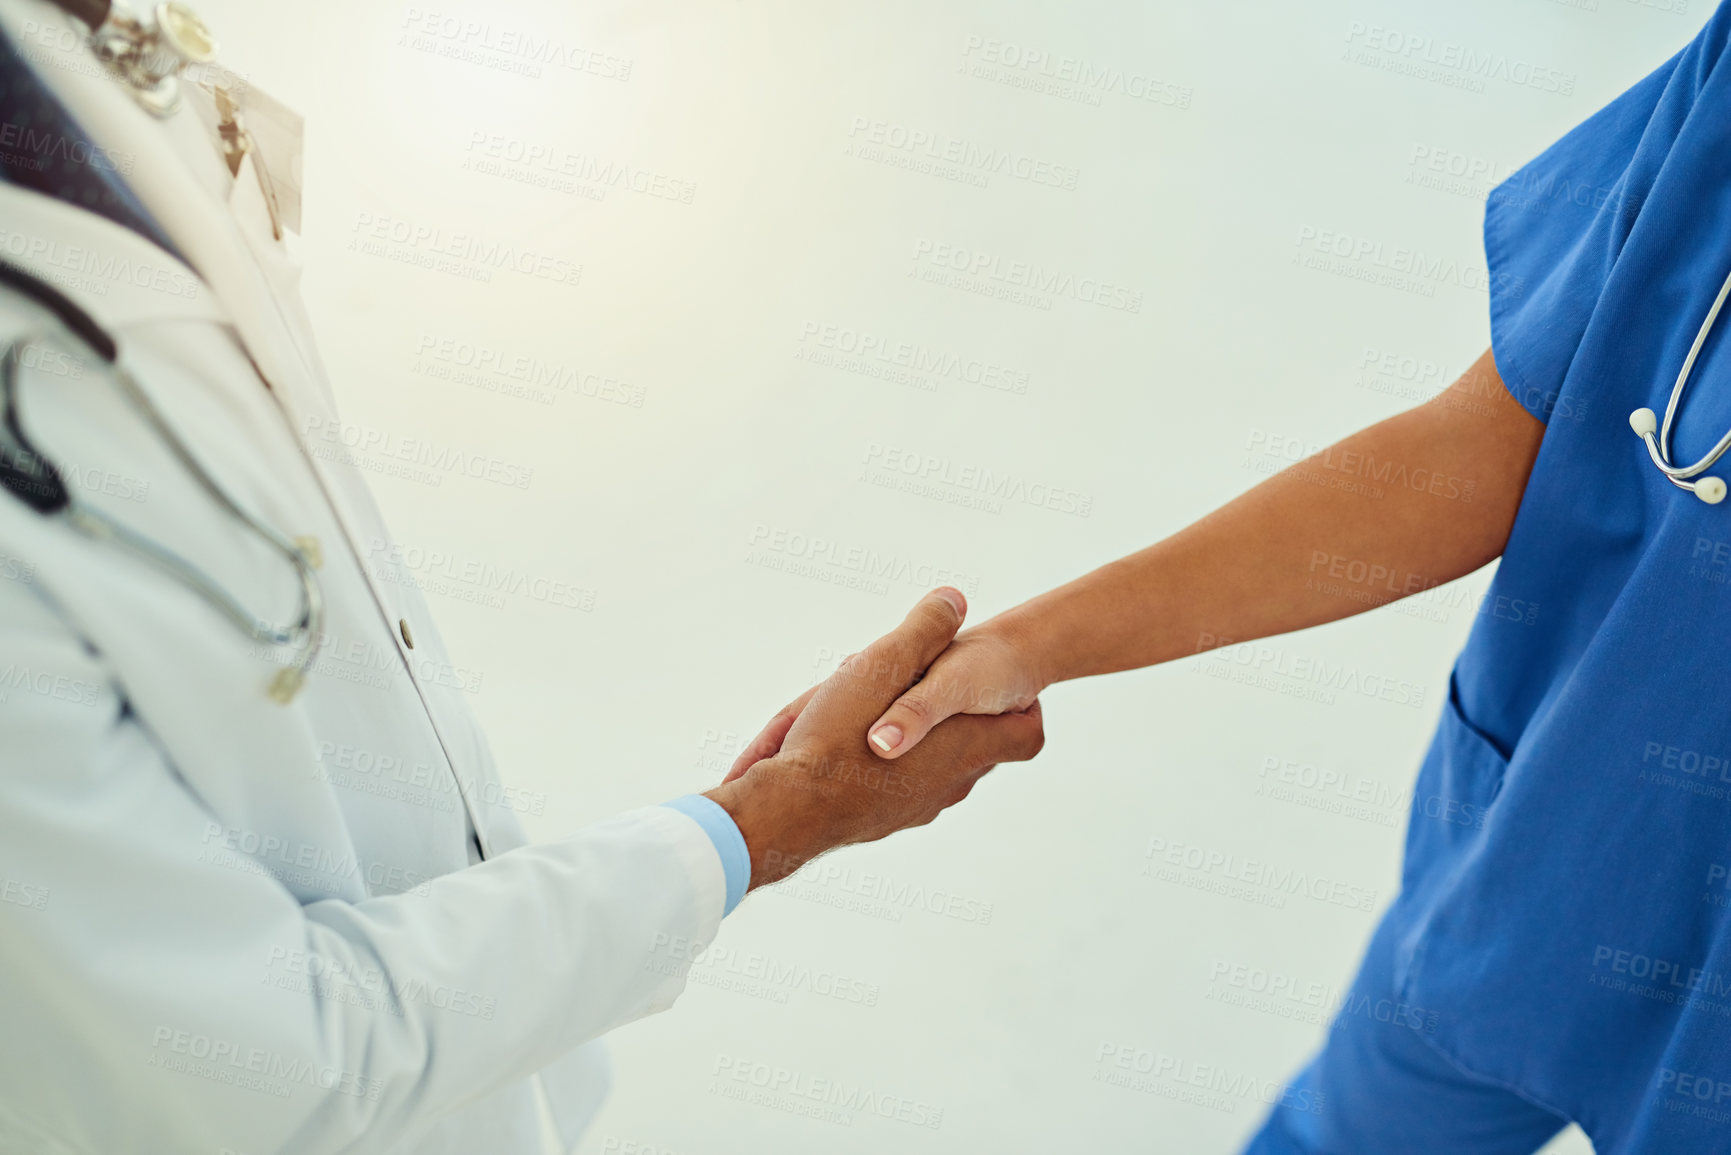 Buy stock photo High angle shot of two unidentifiable healthcare practitioners shaking hands in the hospital foyer